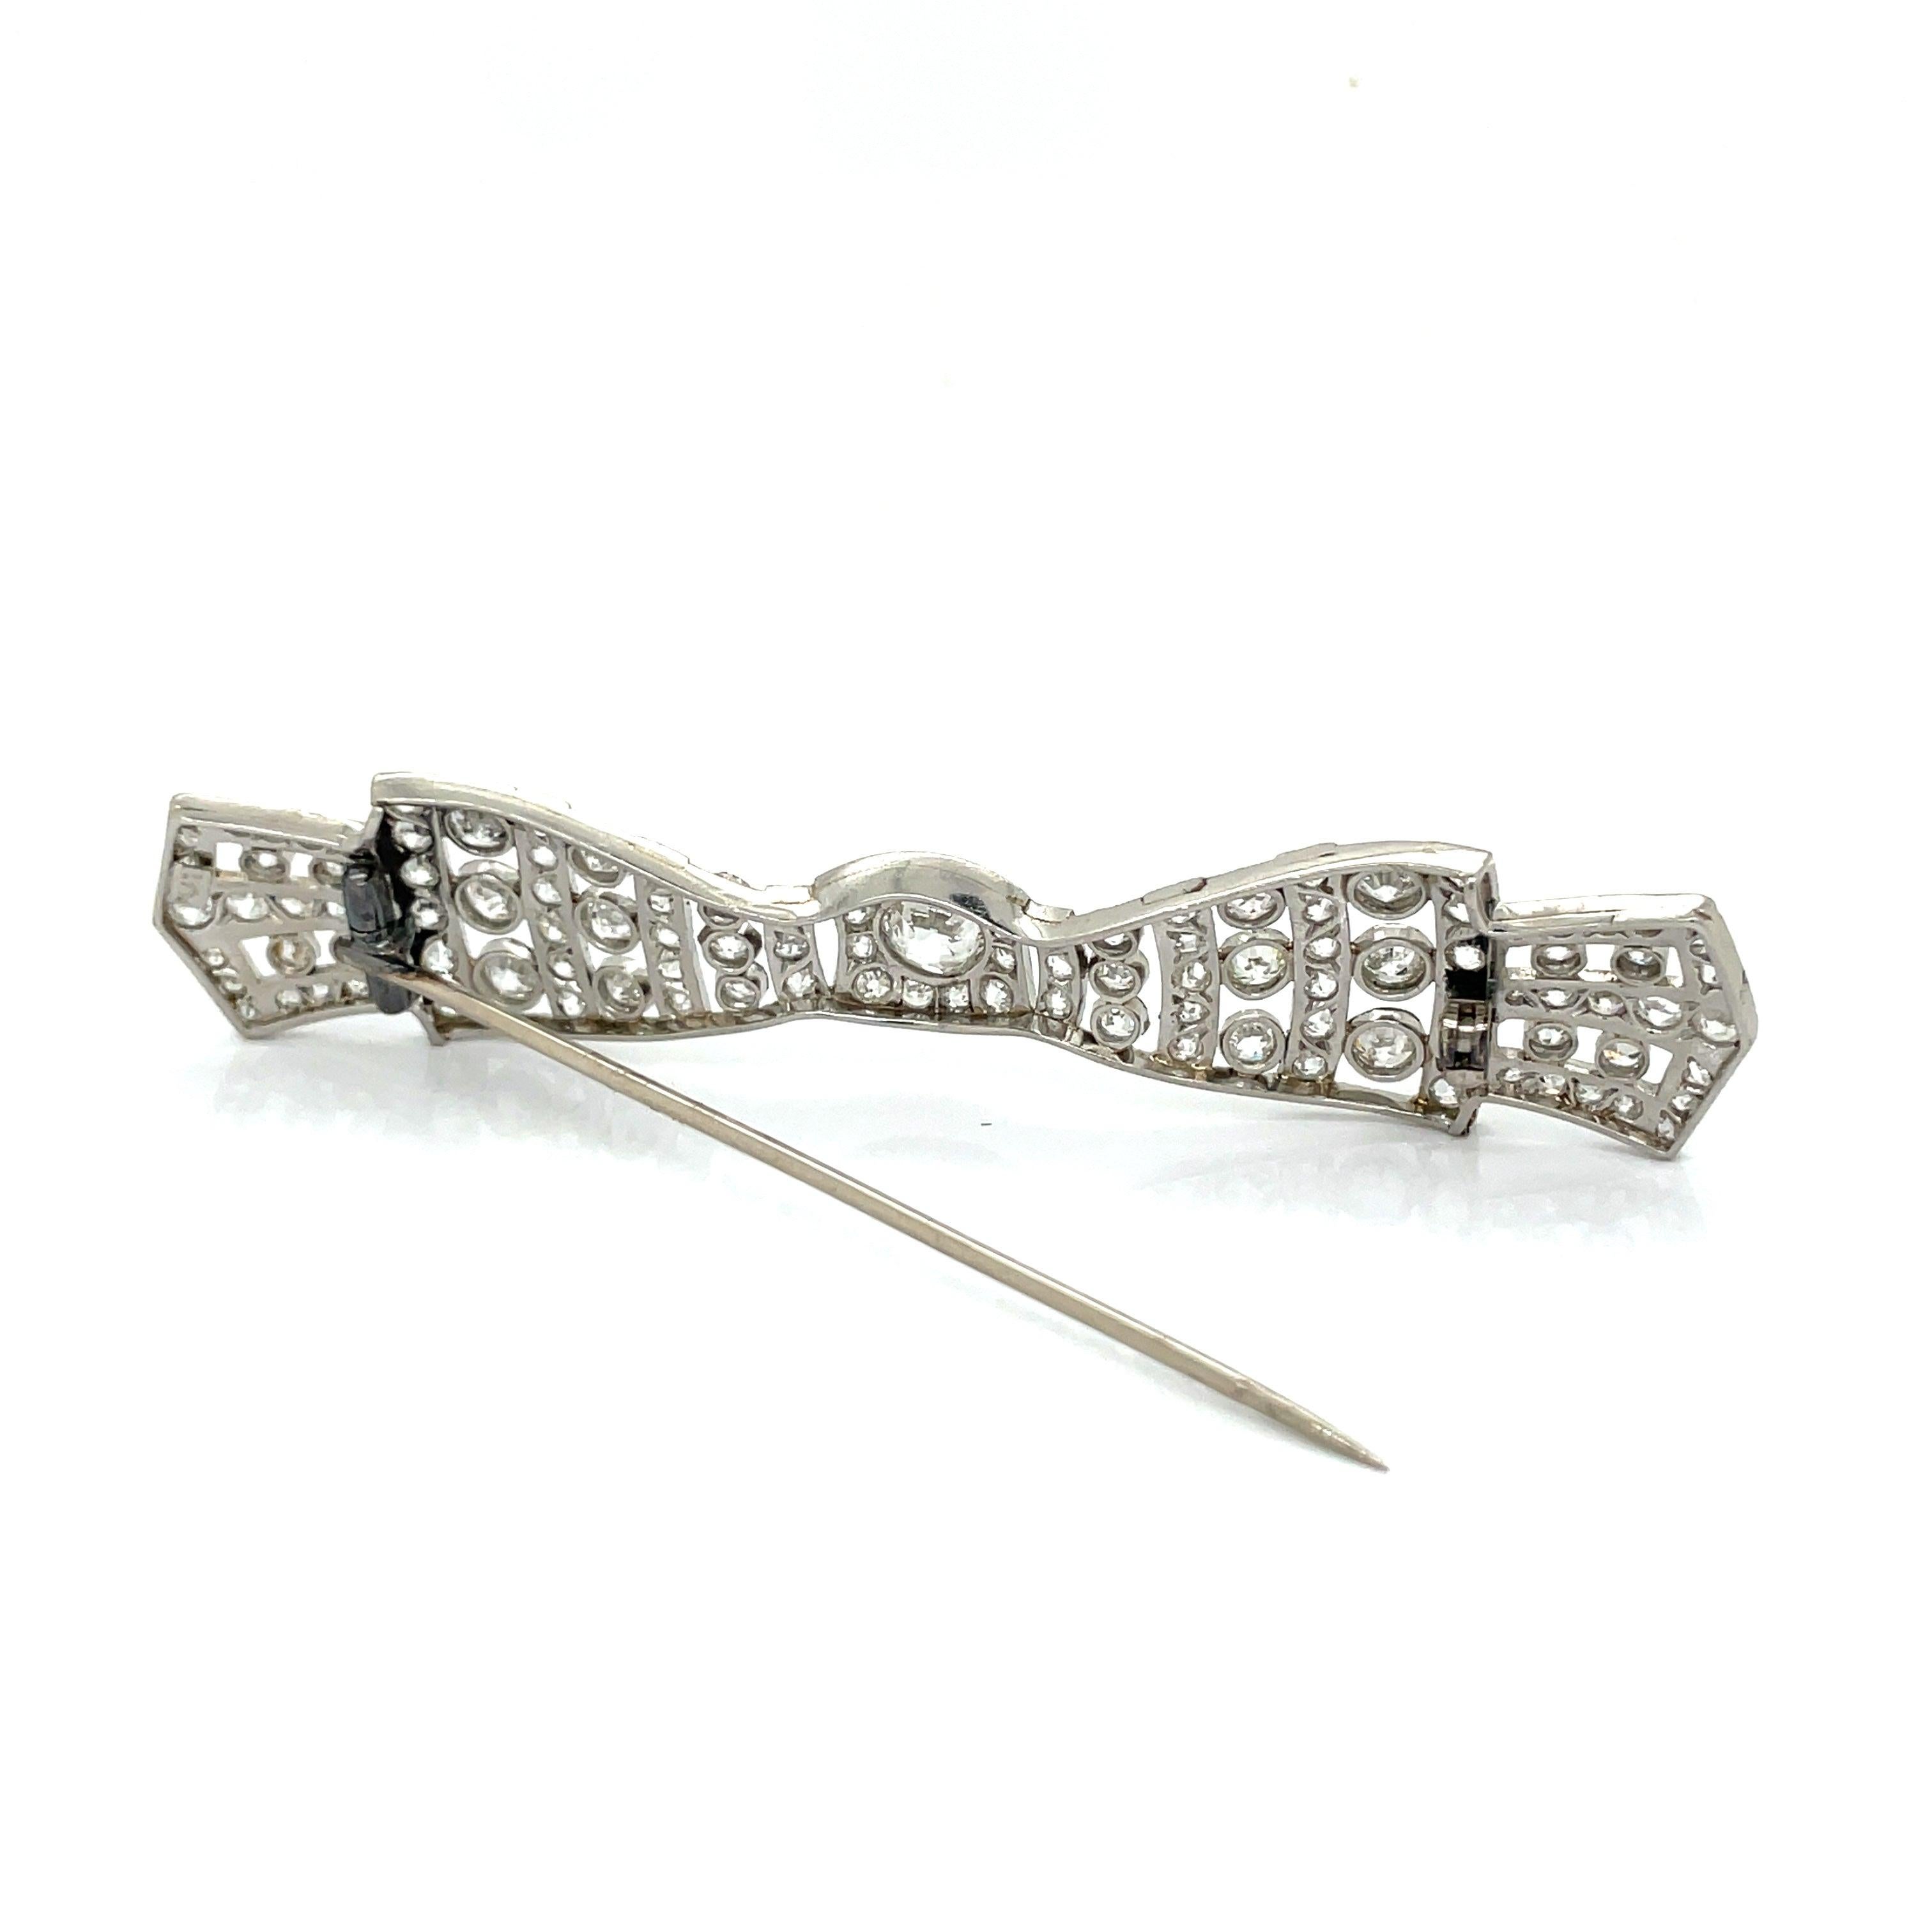 4.24 Ct. Art Deco Diamond and Platinum Bow Brooch For Sale 2